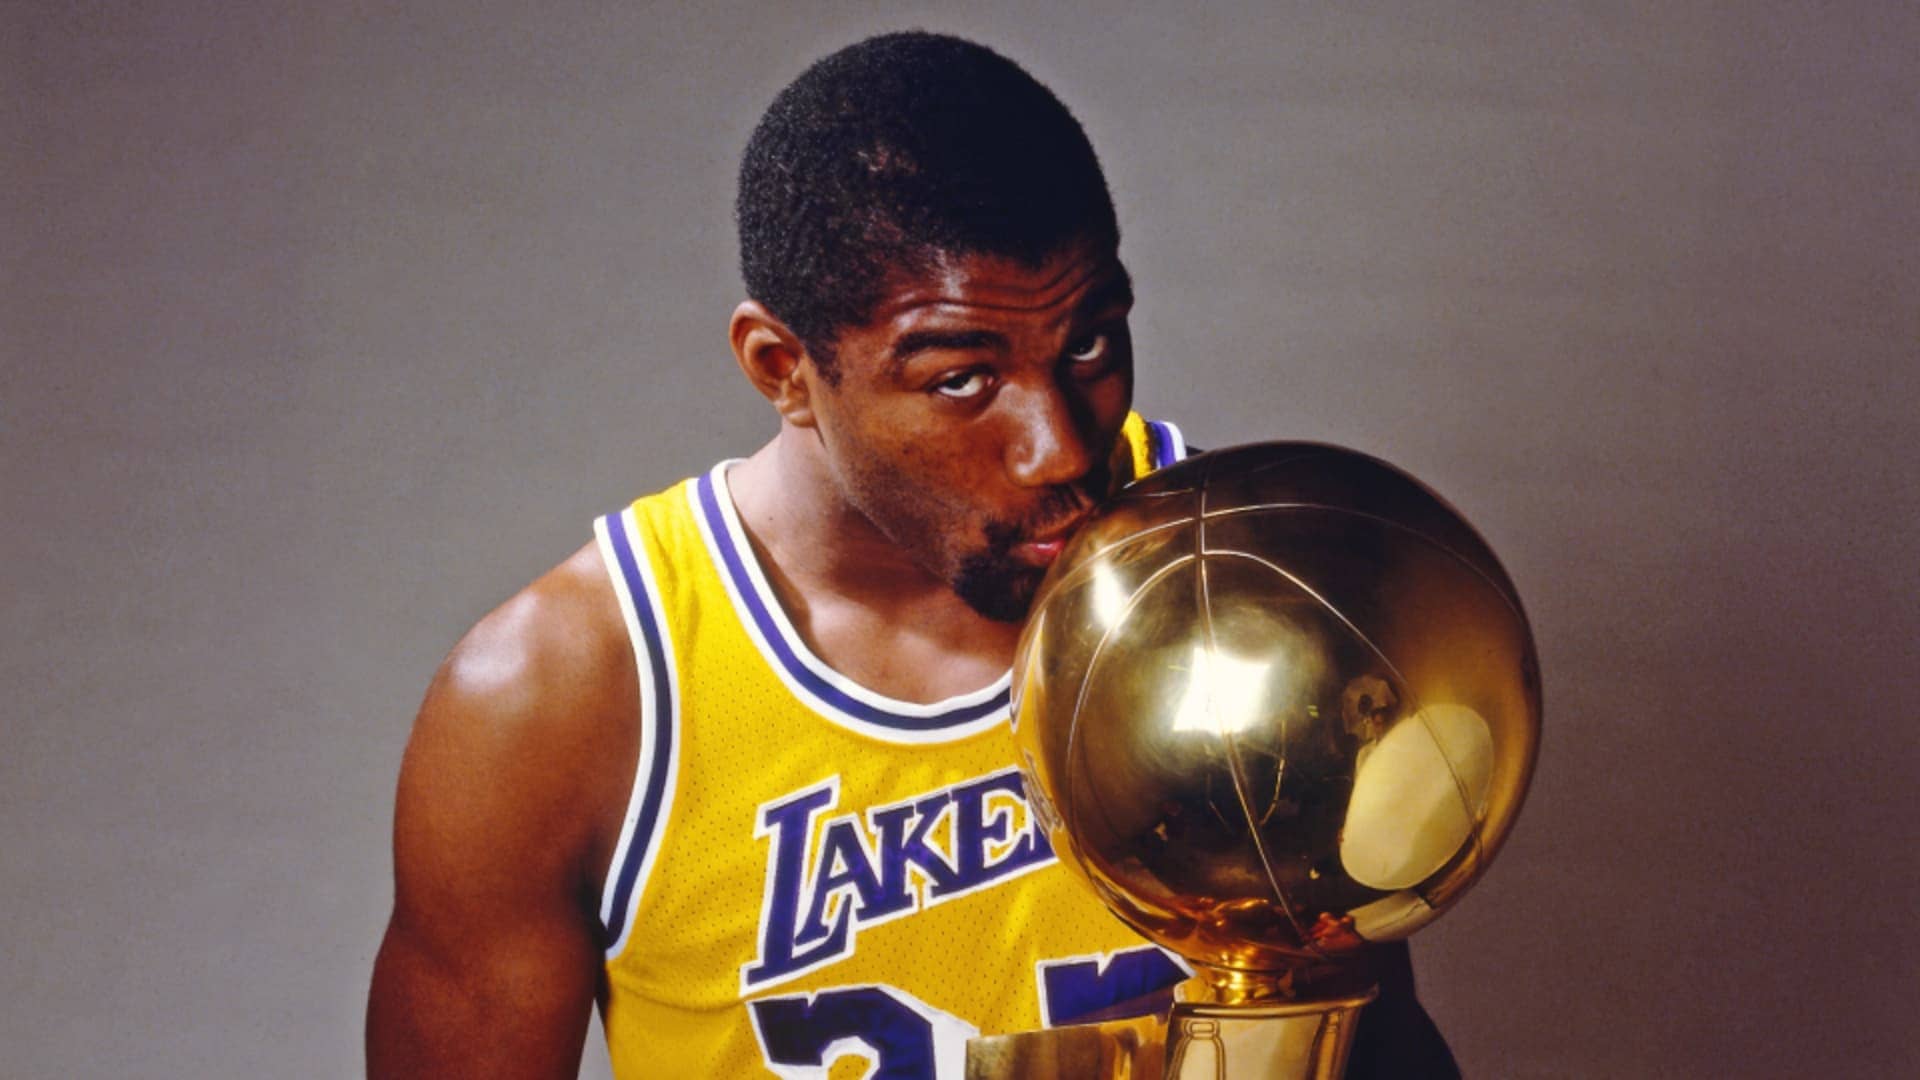 Magic Johnson was the youngest player on the Los Angeles Lakers when they won the 1980 NBA championship